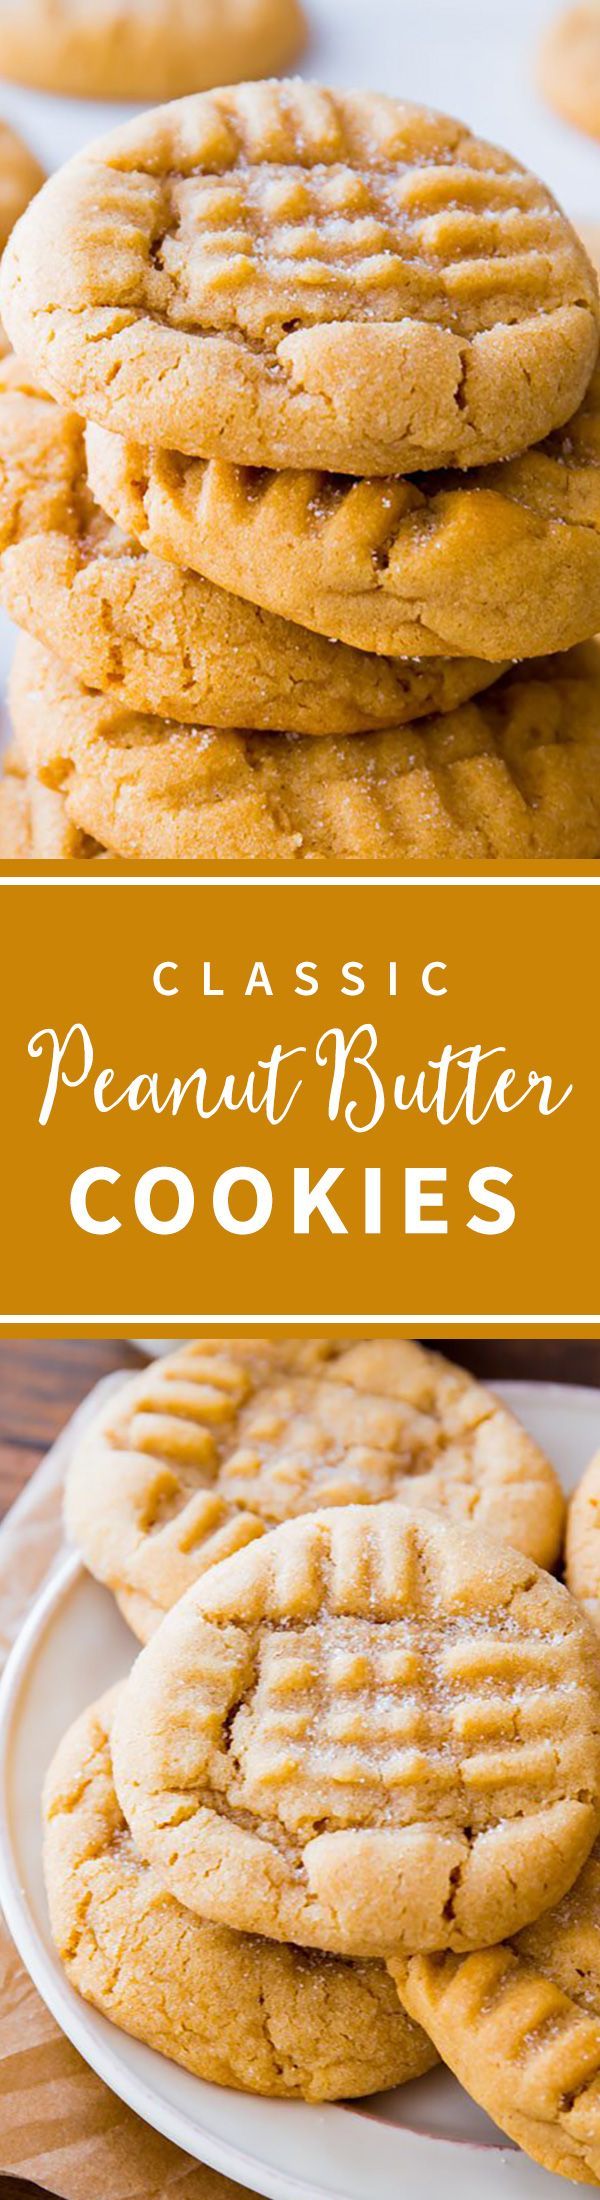 The BEST peanut butter cookies! Soft and chewy with tons of peanut butter flavor. Criss cross peanut butter cookies recipe on